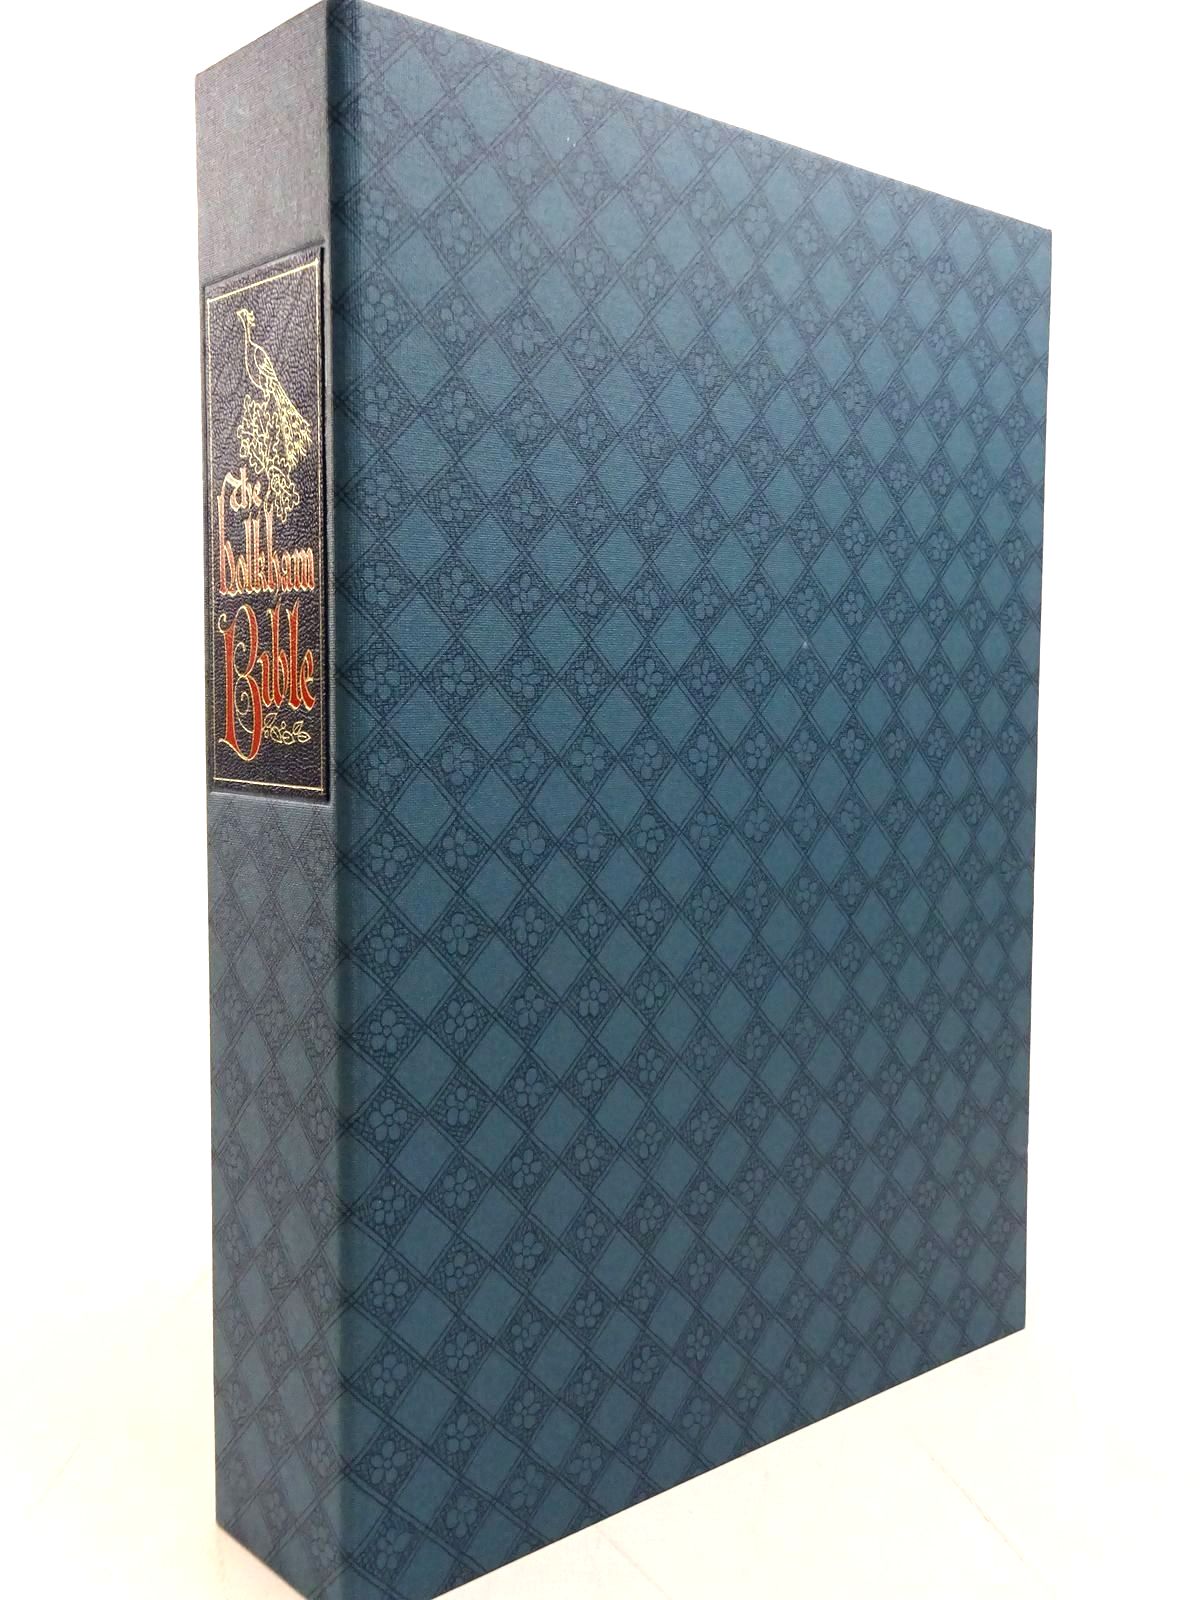 Photo of THE HOLKHAM BIBLE written by Brown, Michelle P. published by Folio Society (STOCK CODE: 2131381)  for sale by Stella & Rose's Books